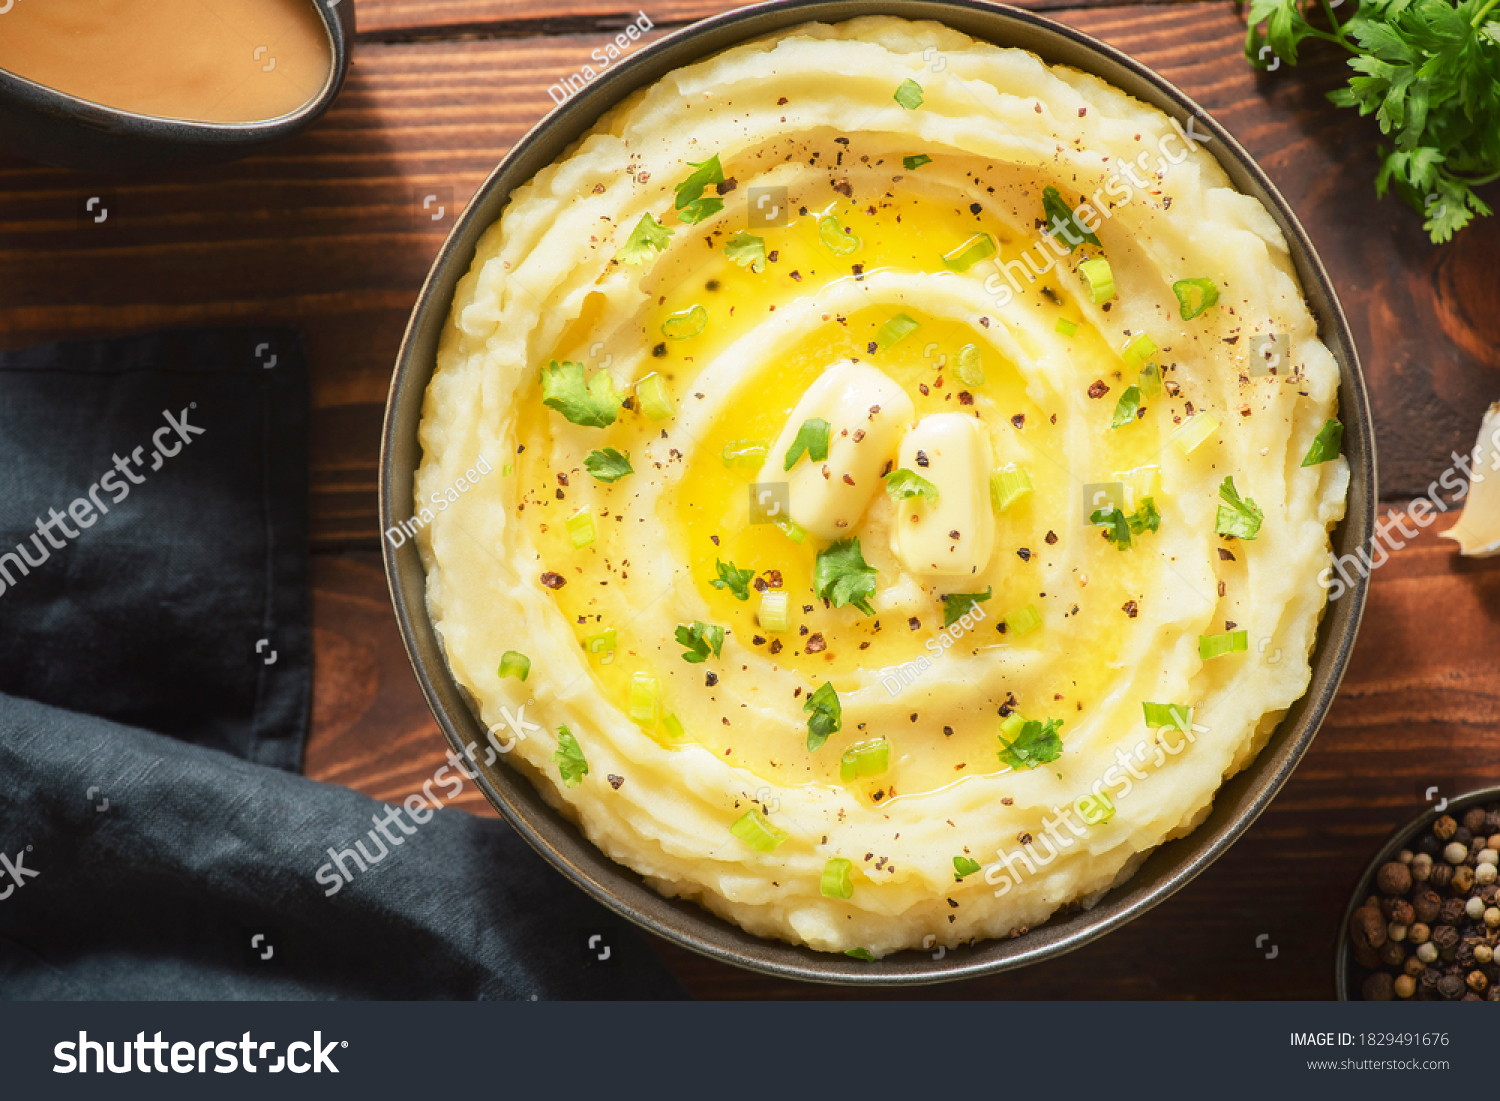 Delicious creamy mashed potatoes with butter, fresh herbs and freshly-cracked black pepper. Top view with close up. #1829491676